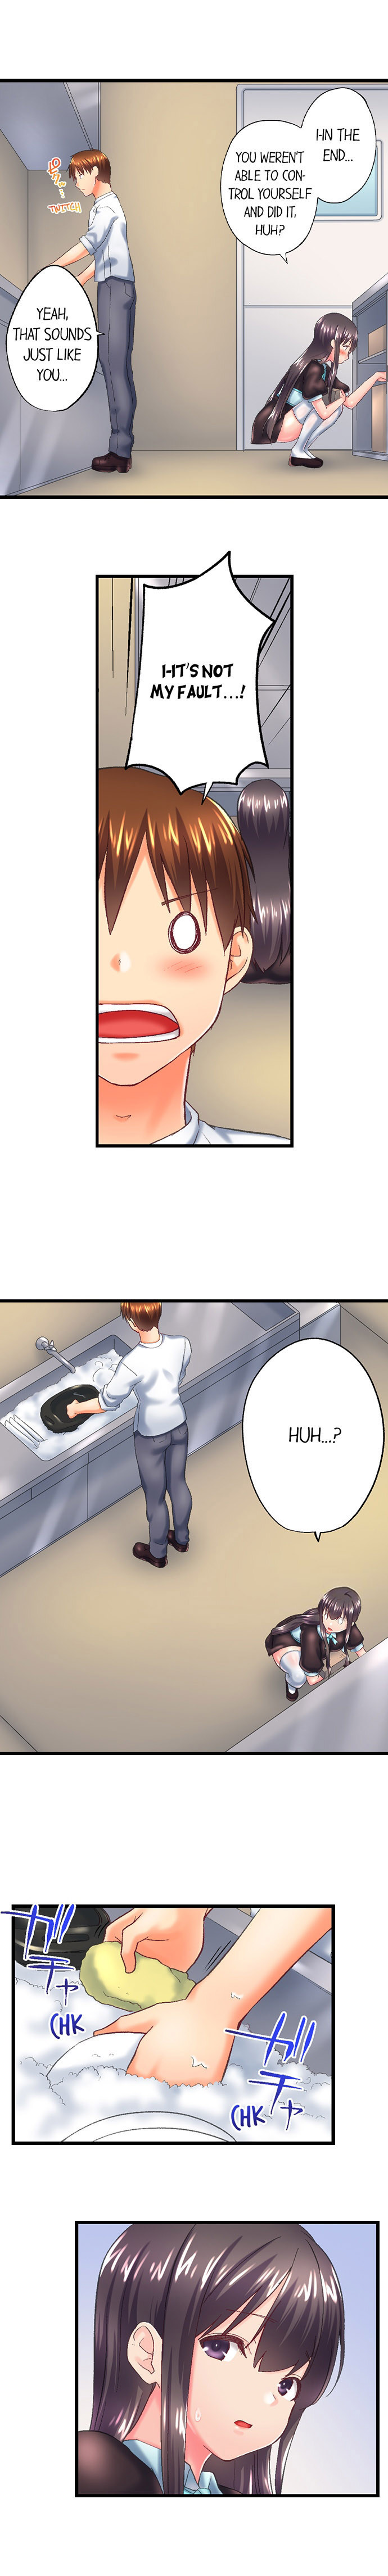 My Brother’s Slipped Inside Me in The Bathtub Chapter 112 - Page 3